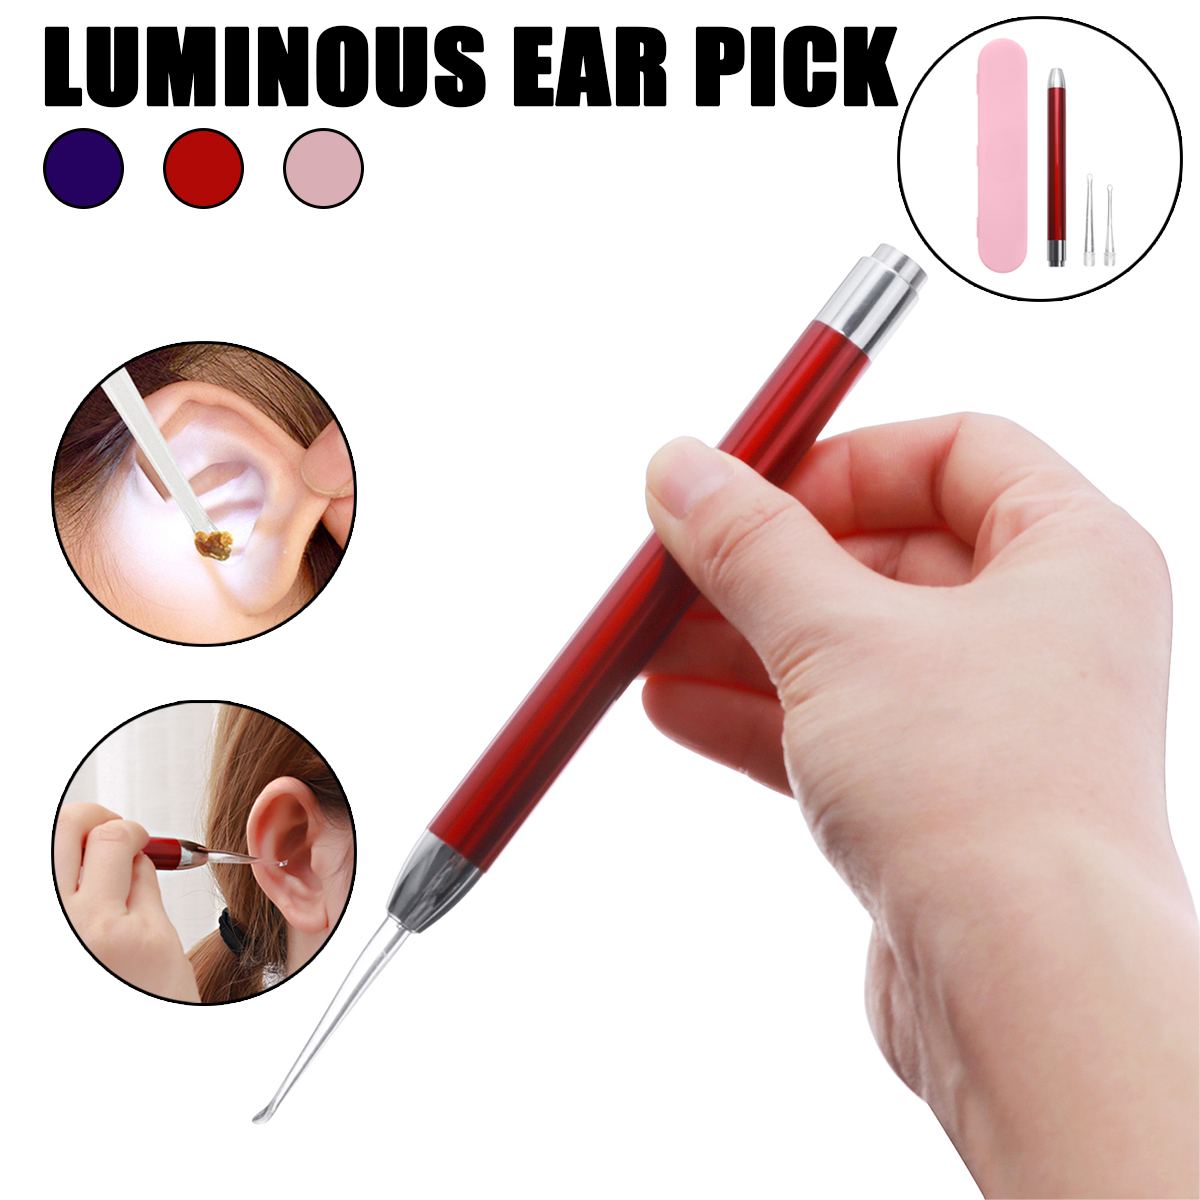 LED-Flashlight-Earpick-Ear-Wax-Remover-Ear-Cleaning-Tool-for-Children-and-Adult-Ear-Care-Set-1782776-2